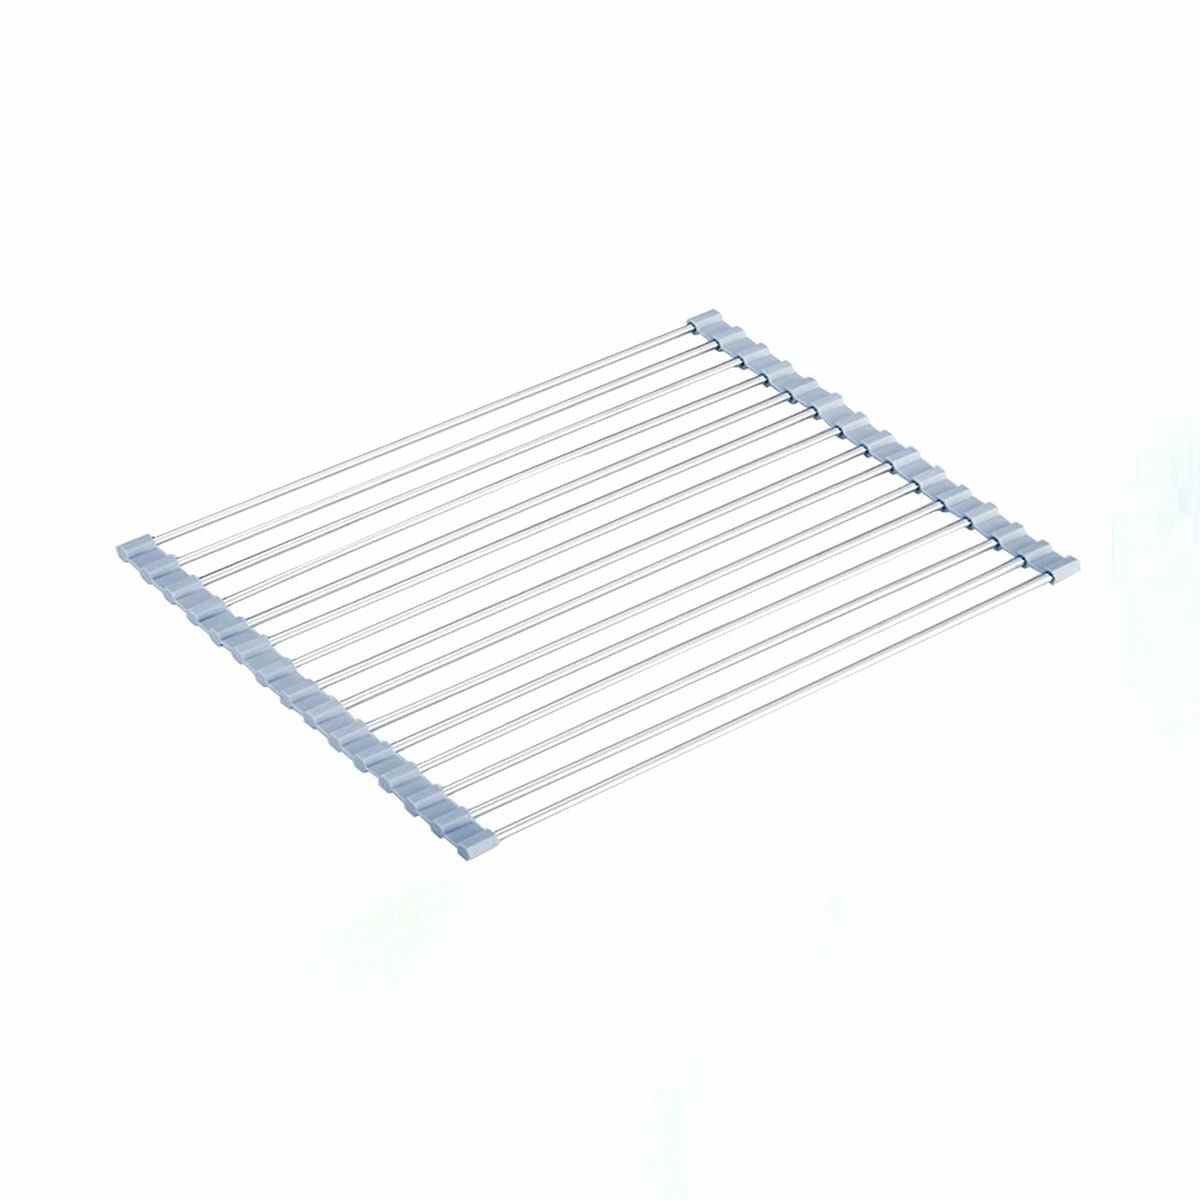 Silver and blue Seropy Roll Up Dish Drying Rack 